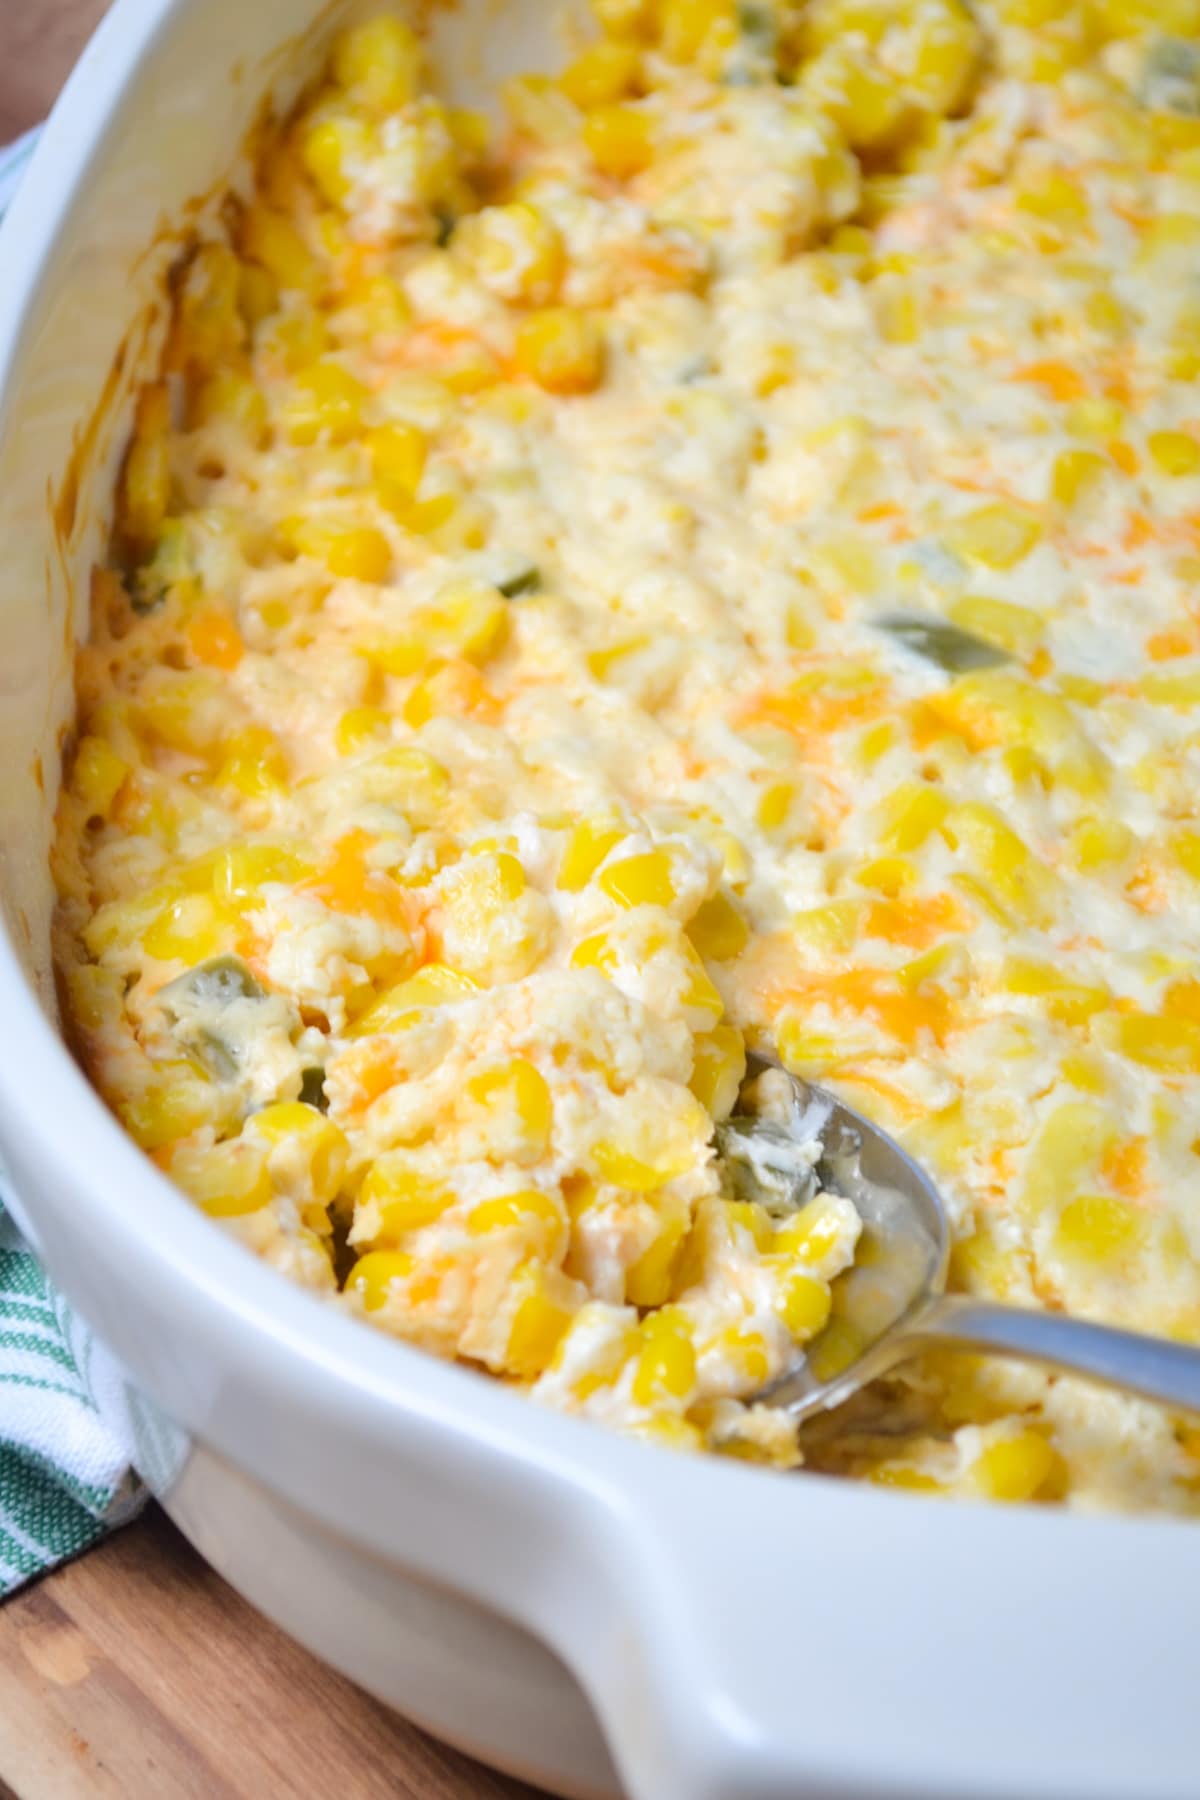 A spoon taking out a portion of corn casserole.